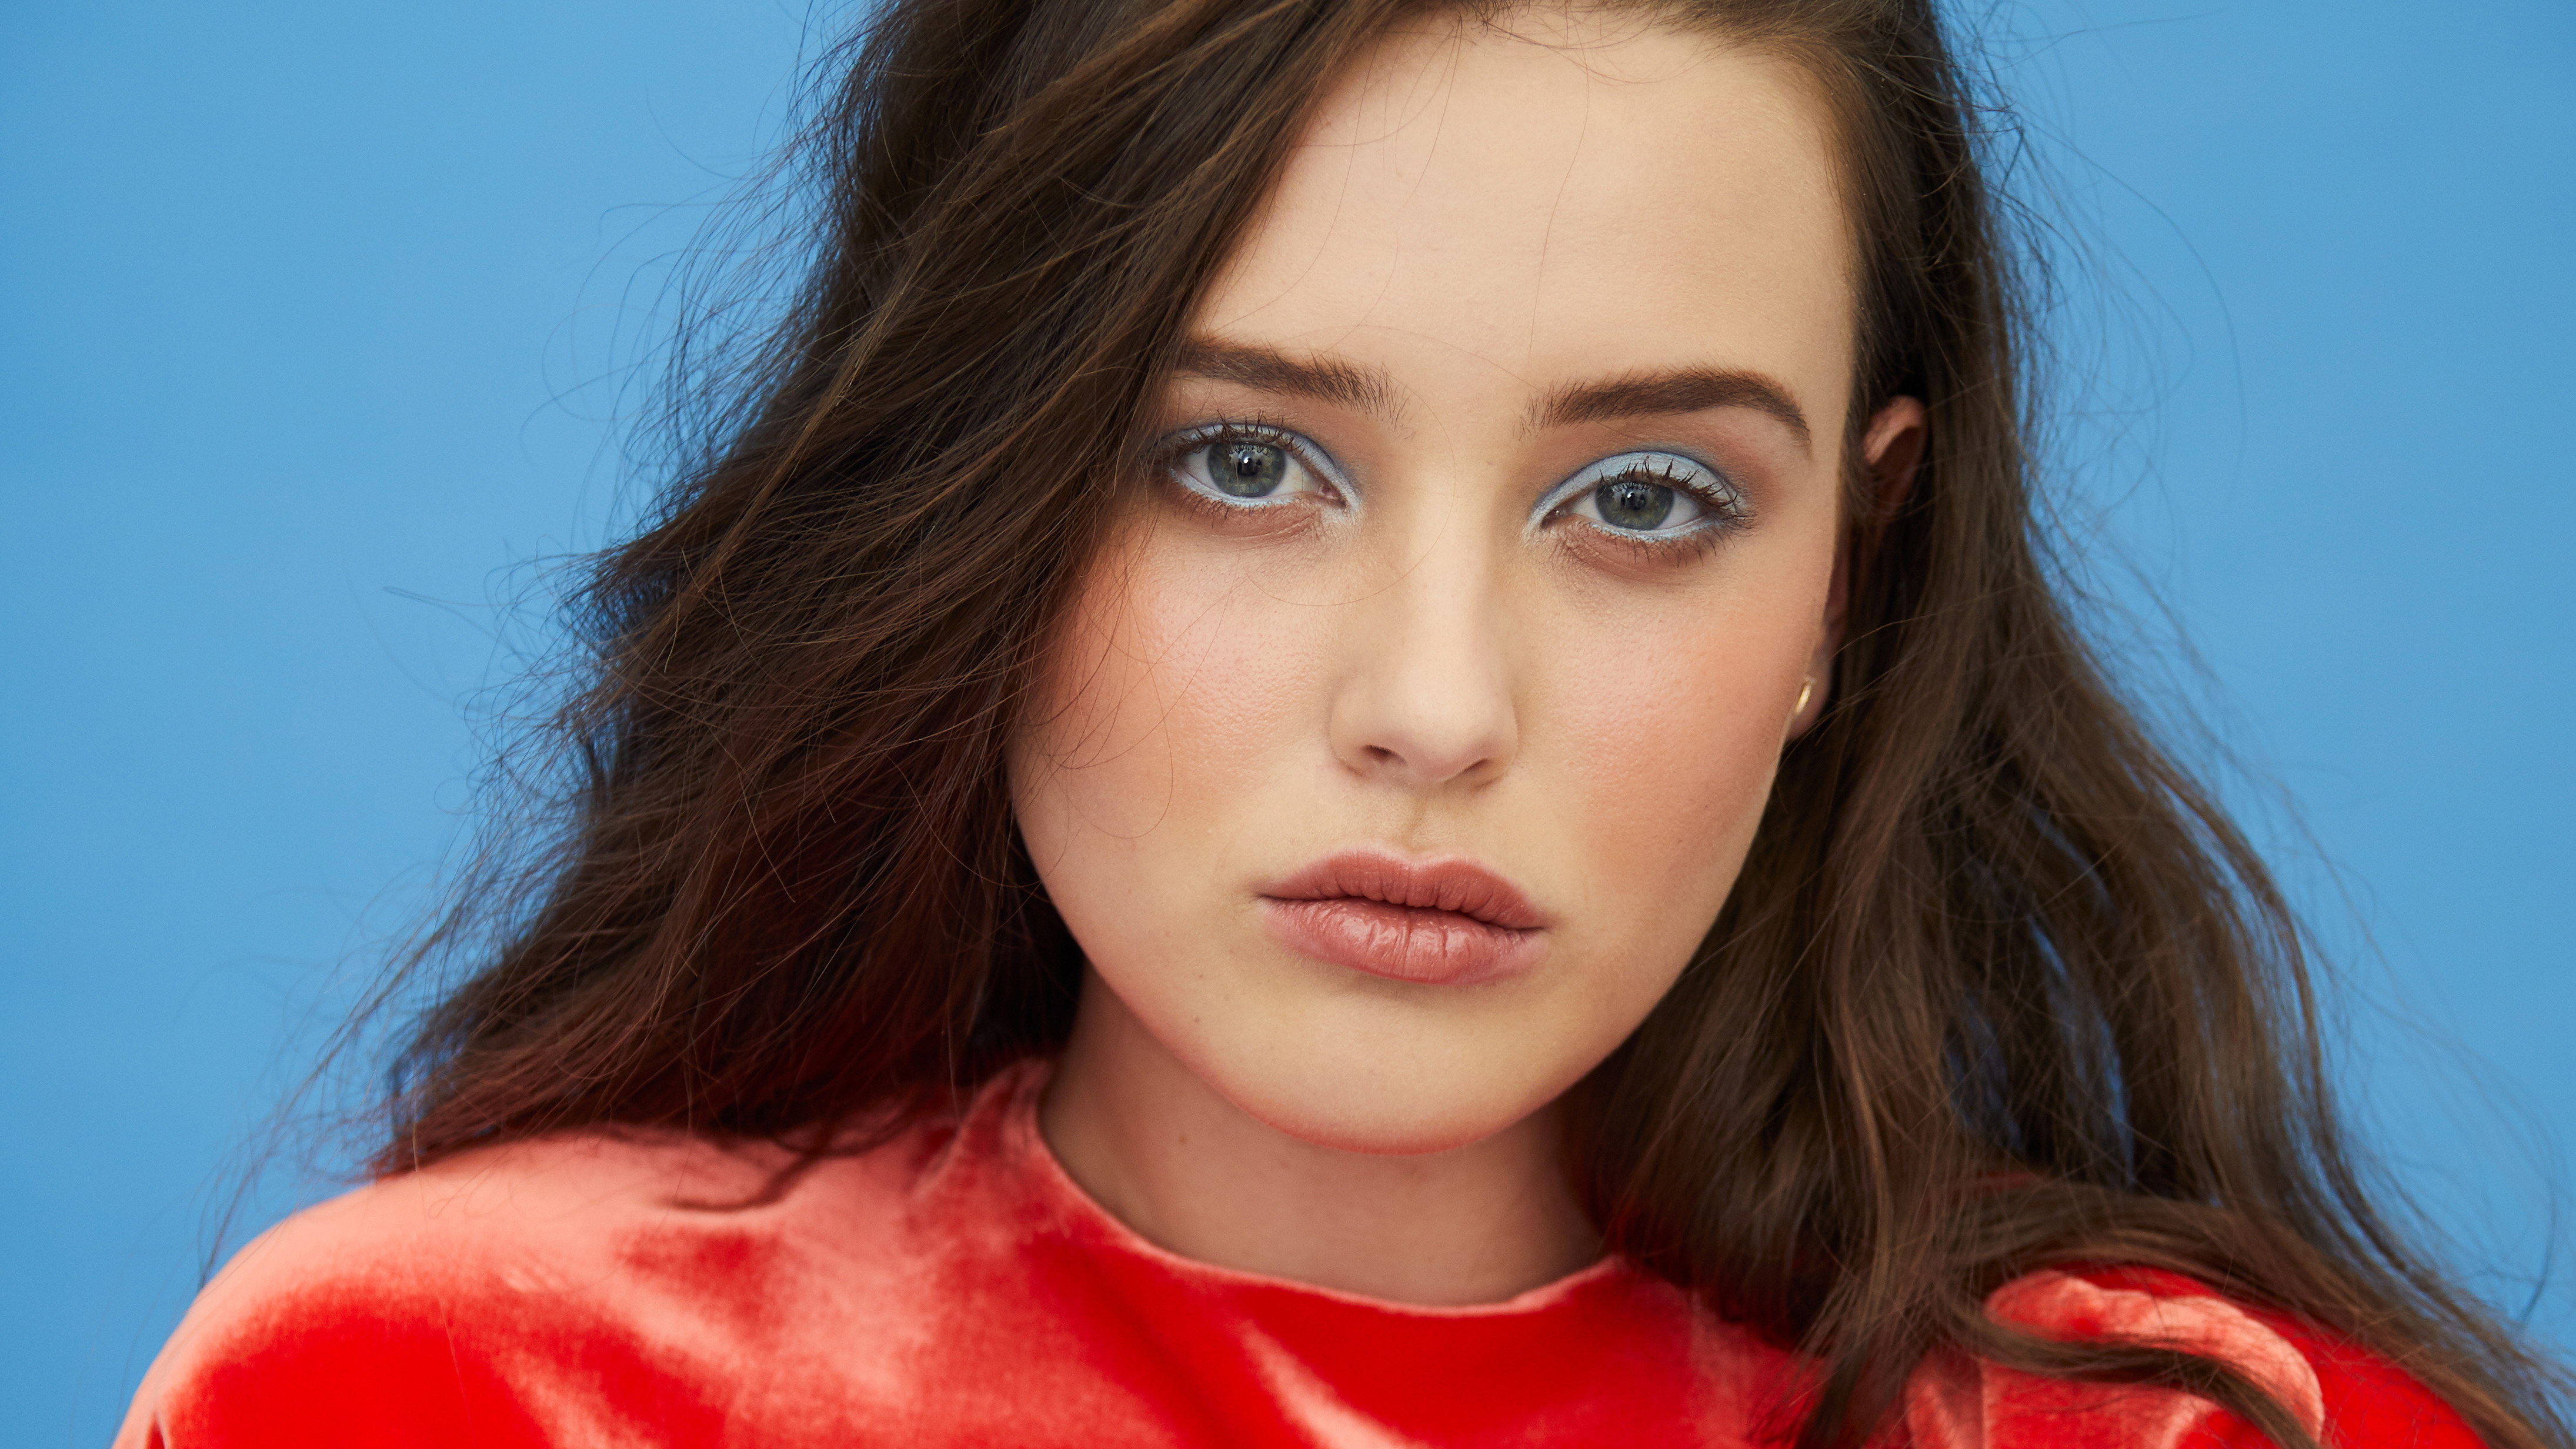 Wallpaper for mobile devices australian, close up, katherine langford, blue eyes